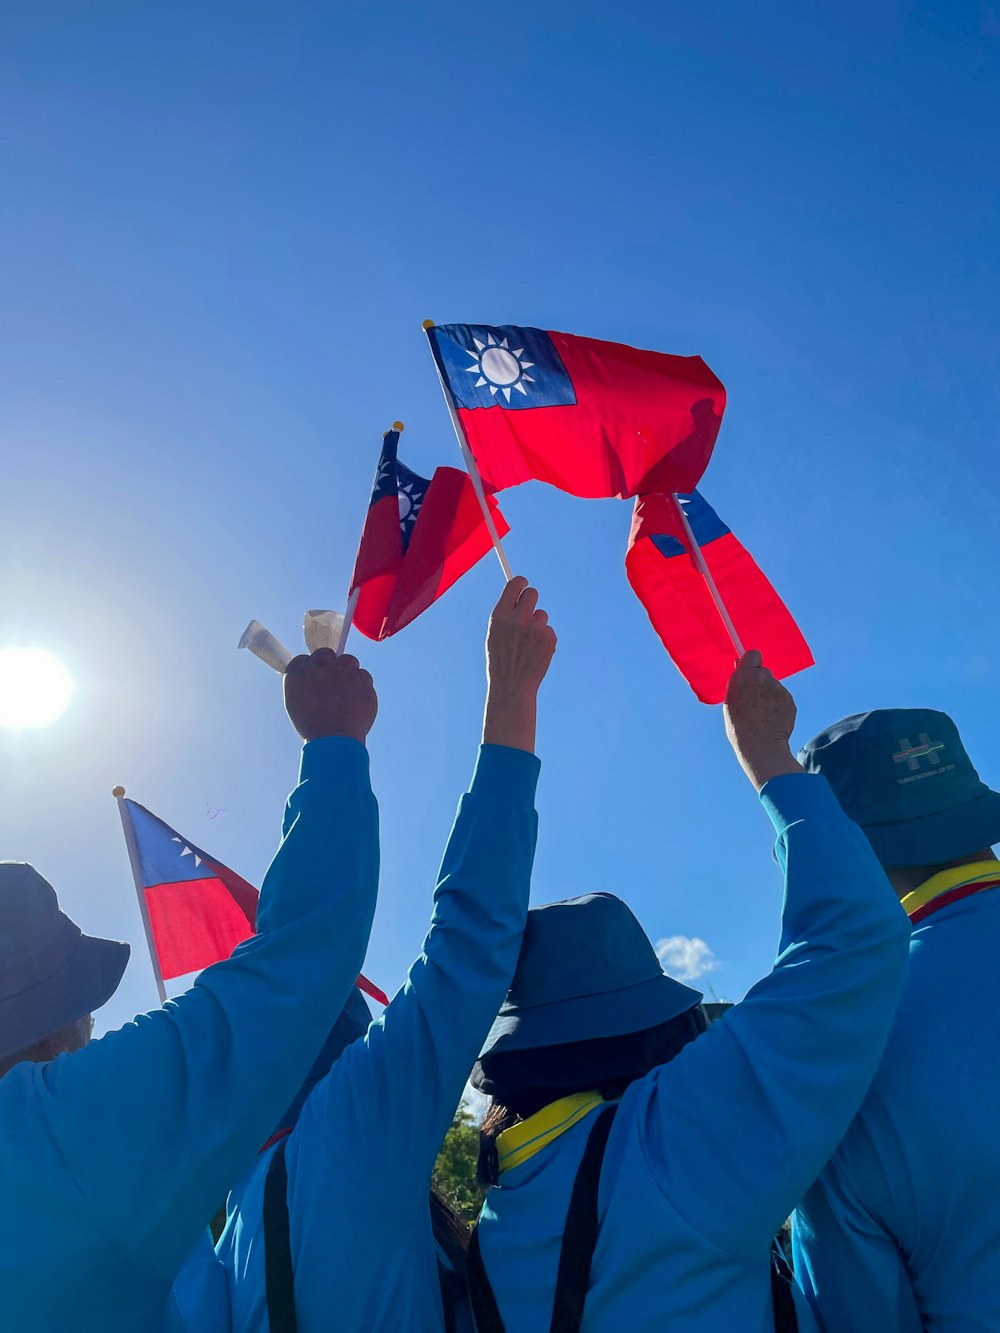 a group of people holding up red and blue flags